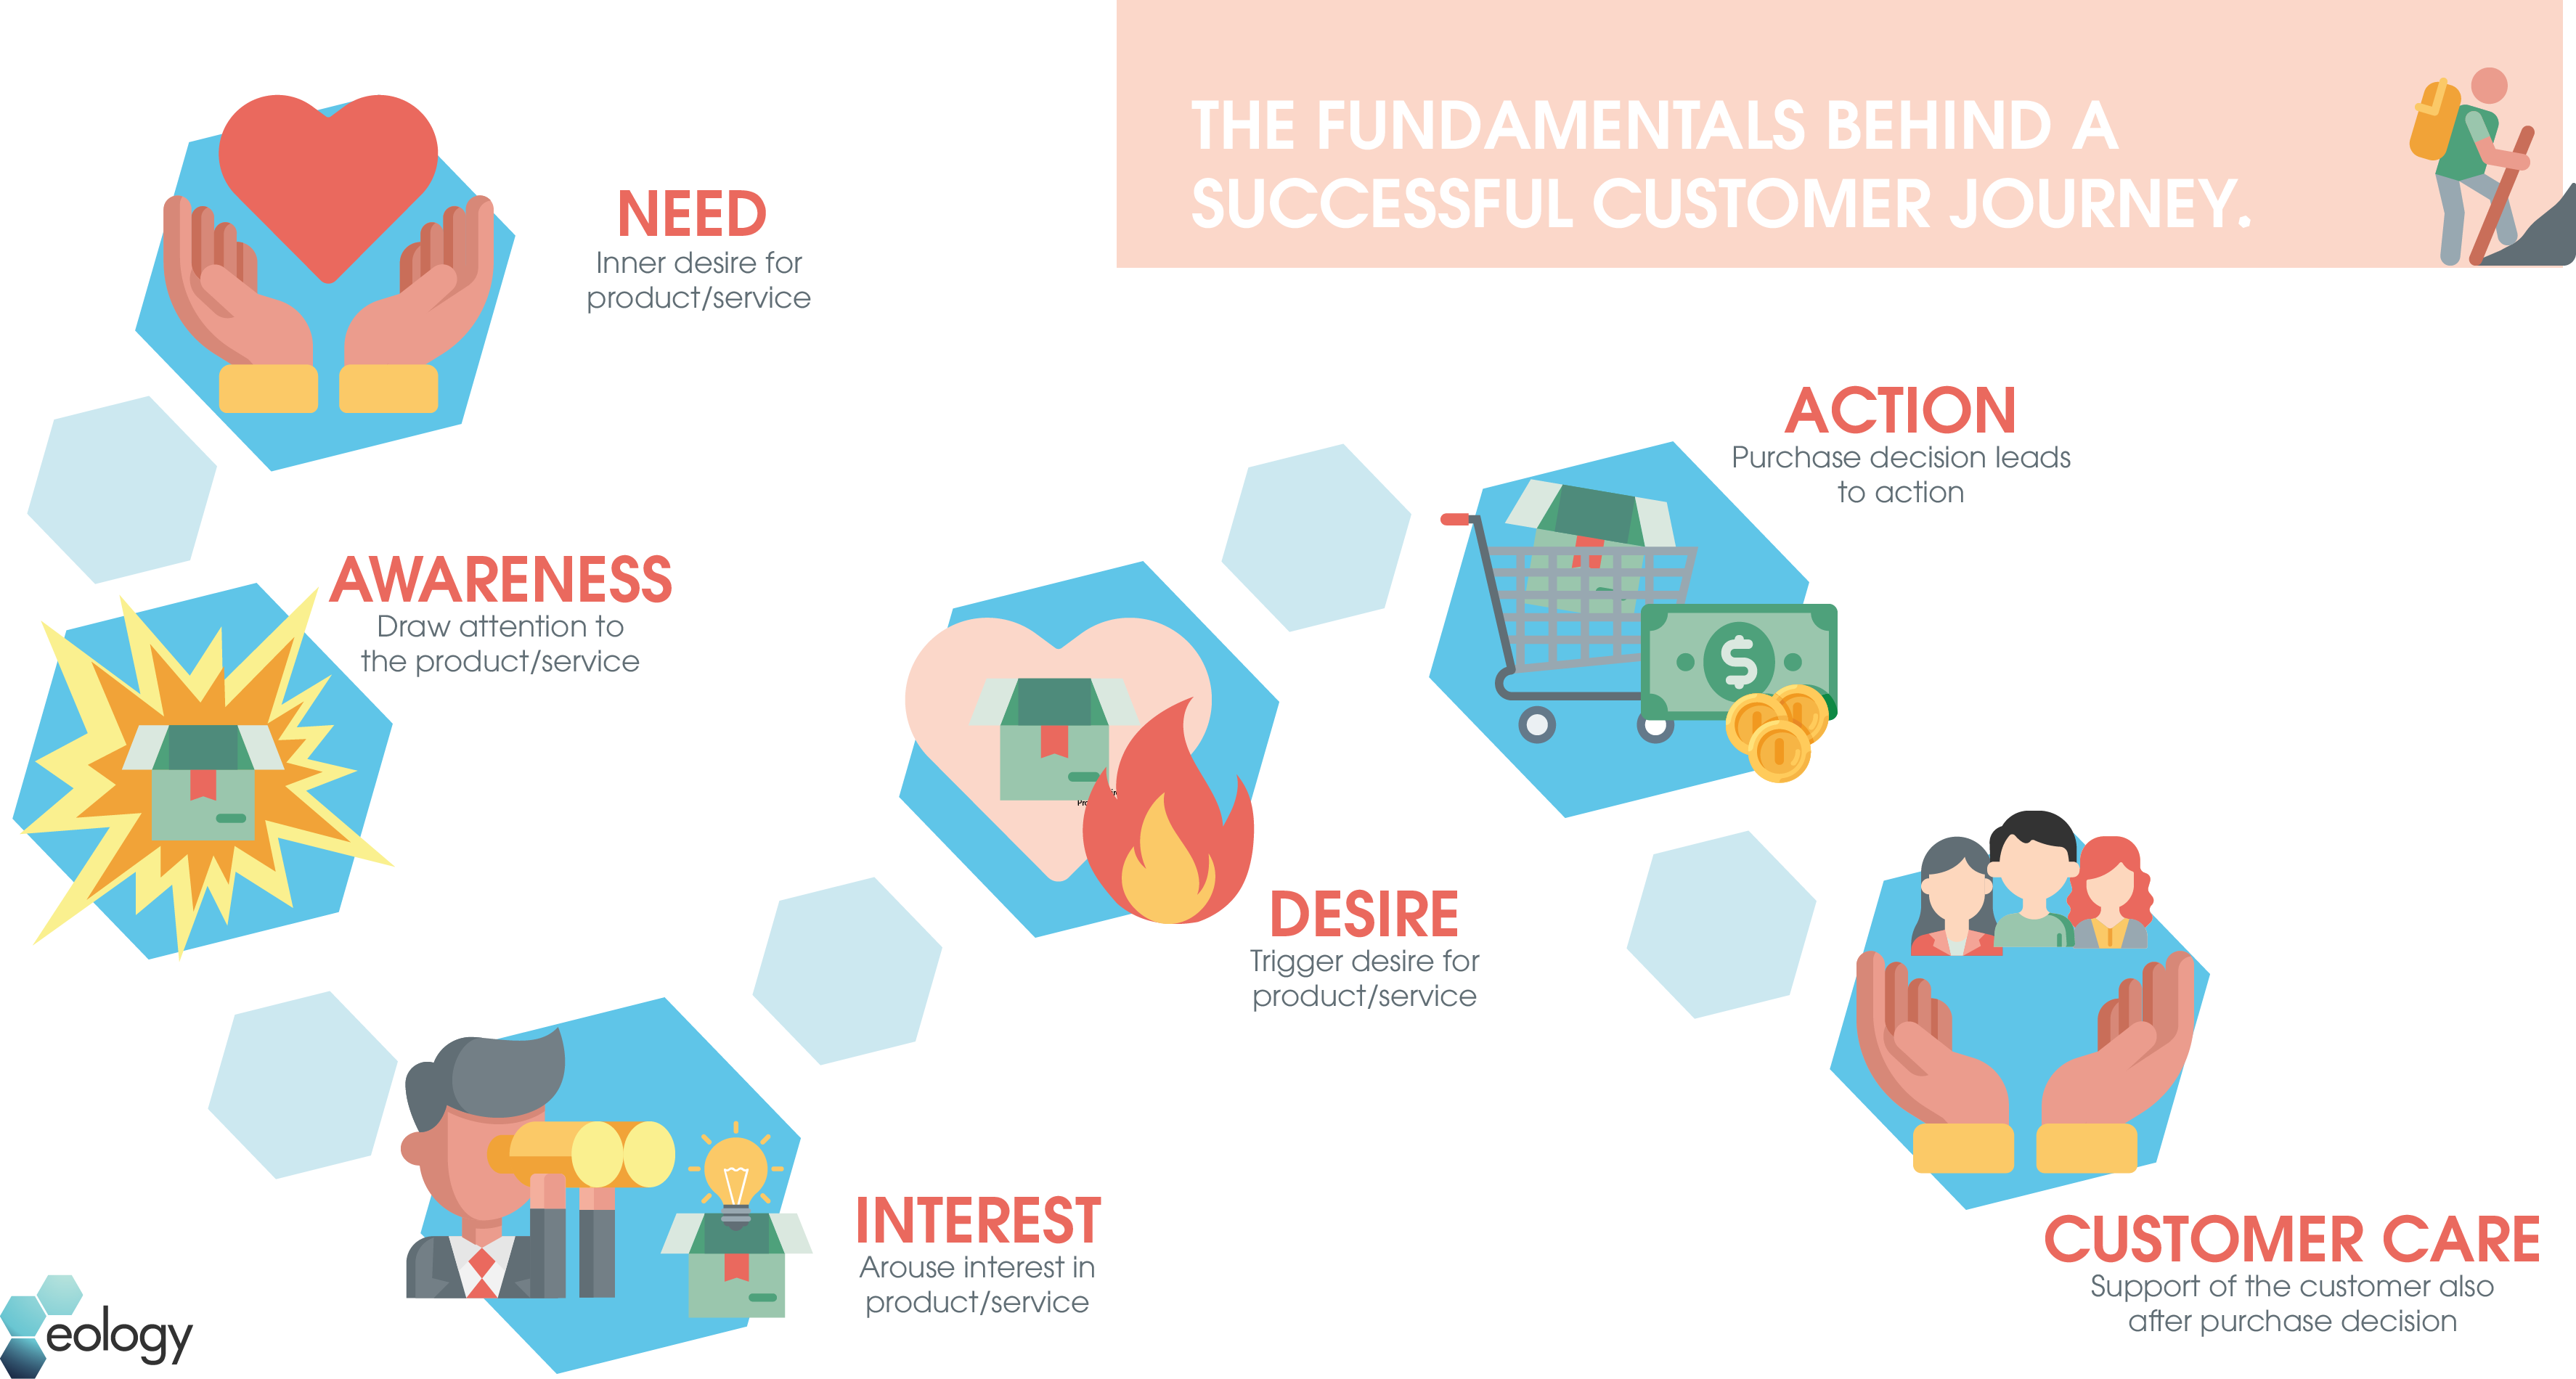 This is what lies behind a successful customer journey - You should pay attention to these basic phases: Need, Awareness, Interest, Desire, Action and Customer Care